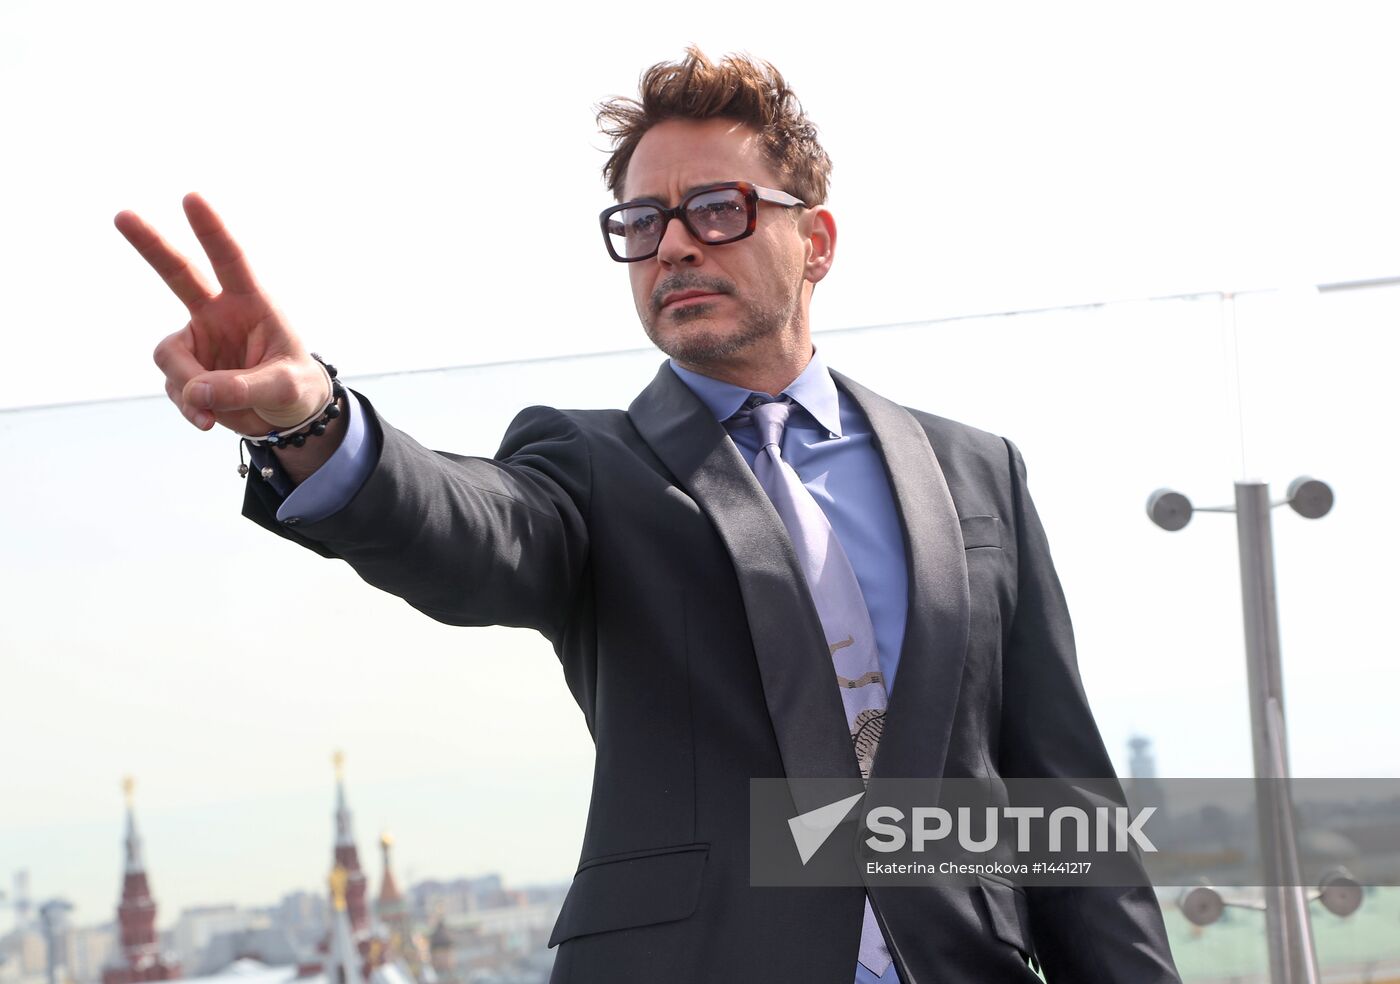 Photo call for "Iron Man 3"